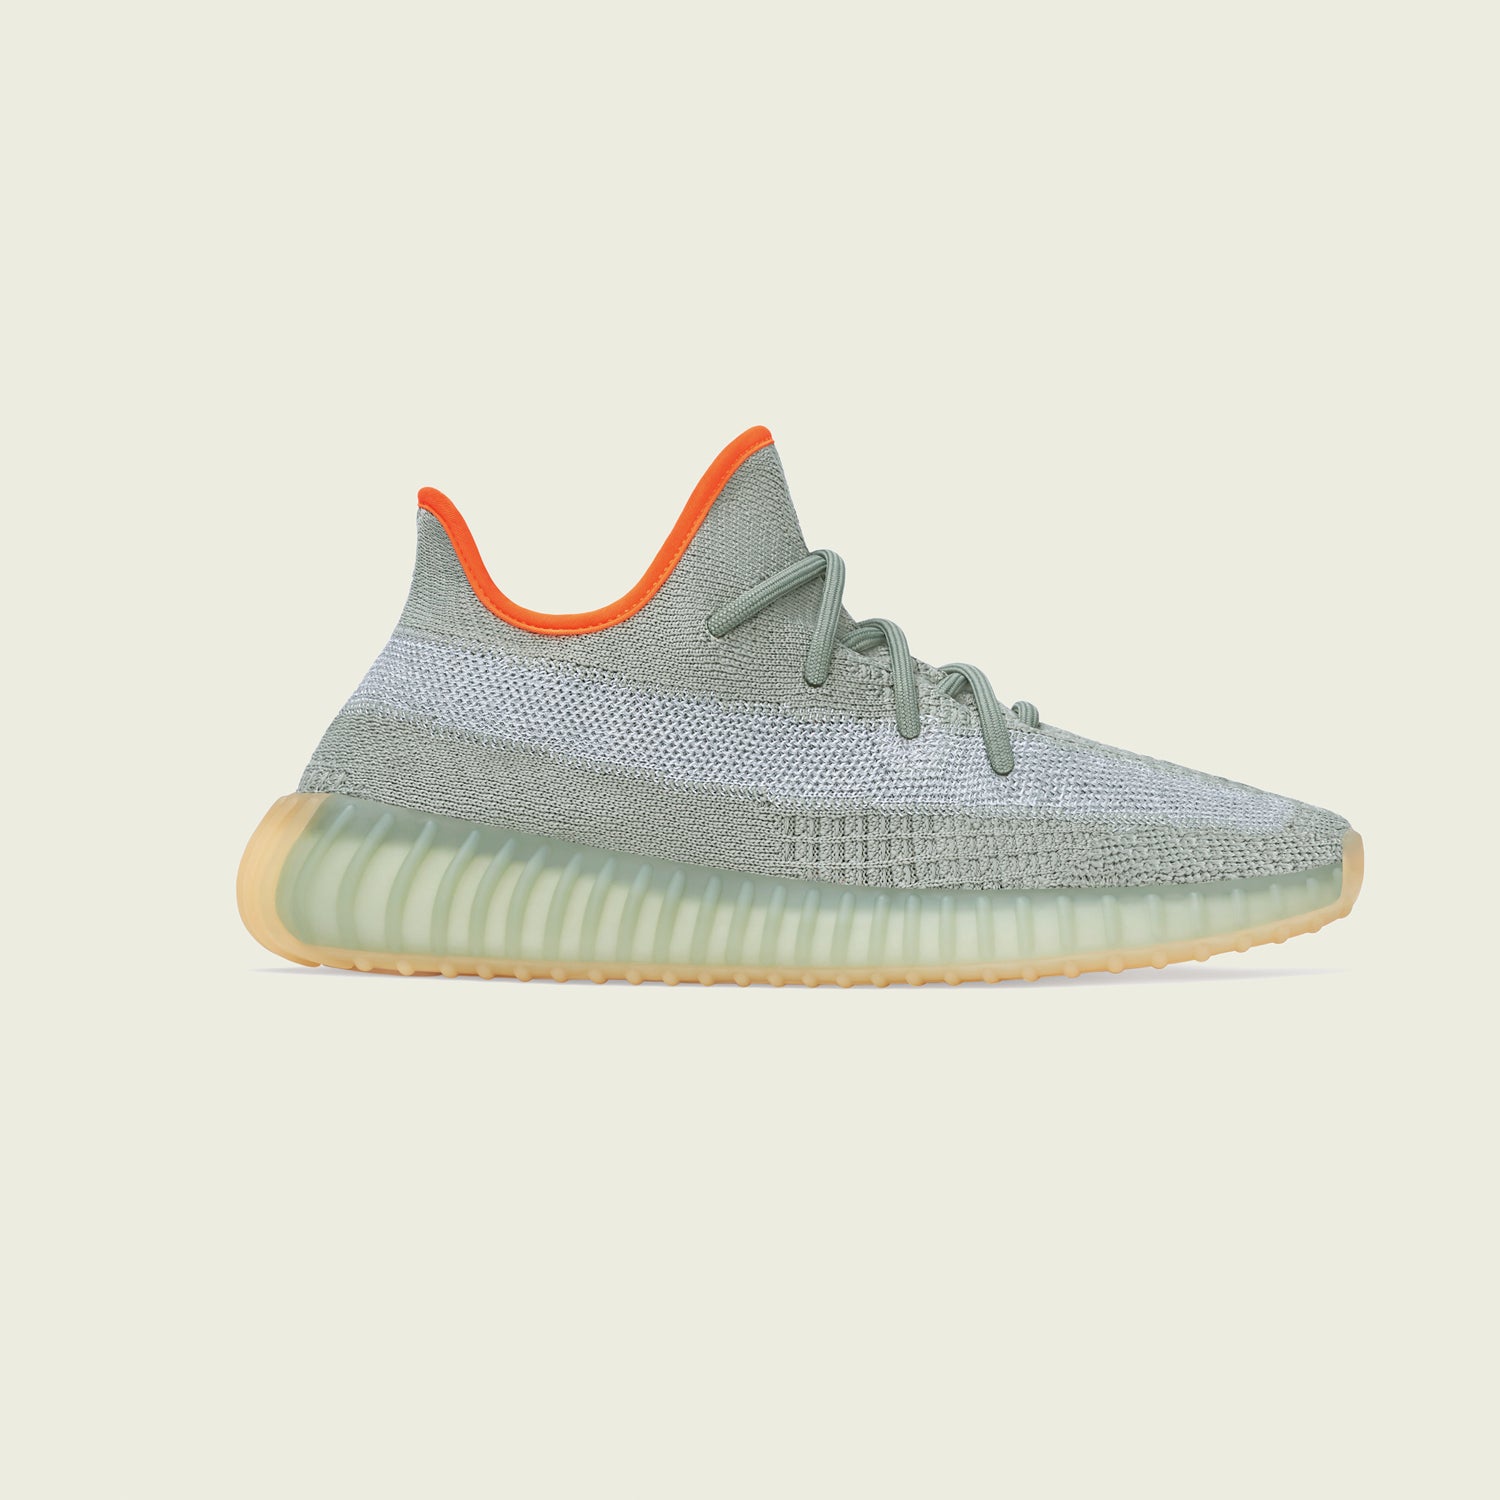 adidas yeezy boost price in philippines